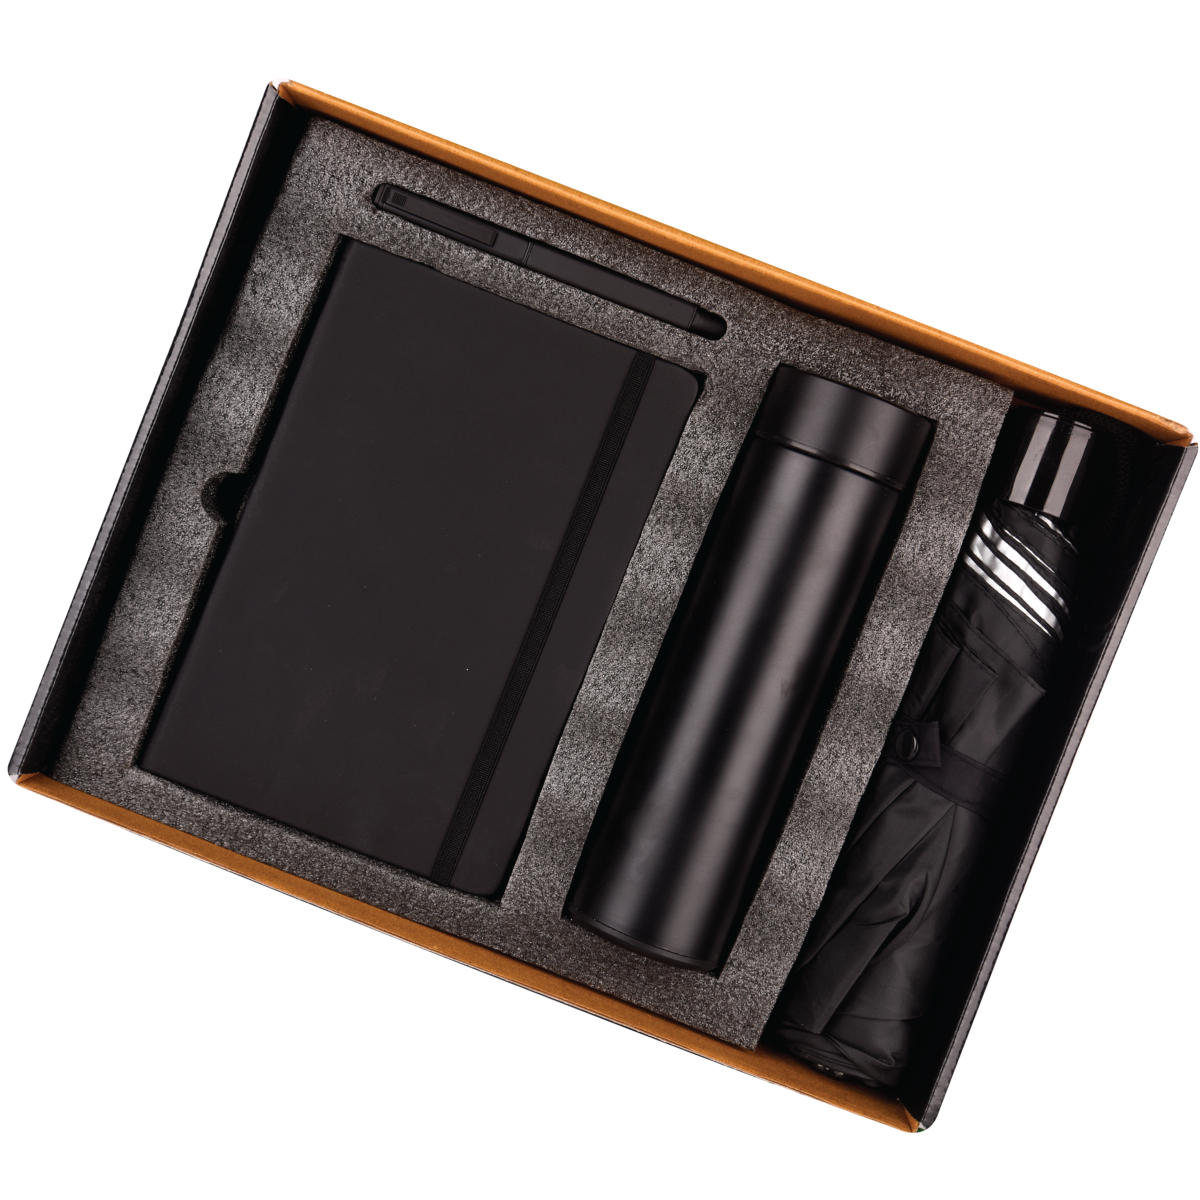 Black 4in1 Notebook Diary, Pen, Bottle and Umbrella Combo Gift Set - For Employee Joining Kit, Corporate, Client or Dealer Gifting HK37351